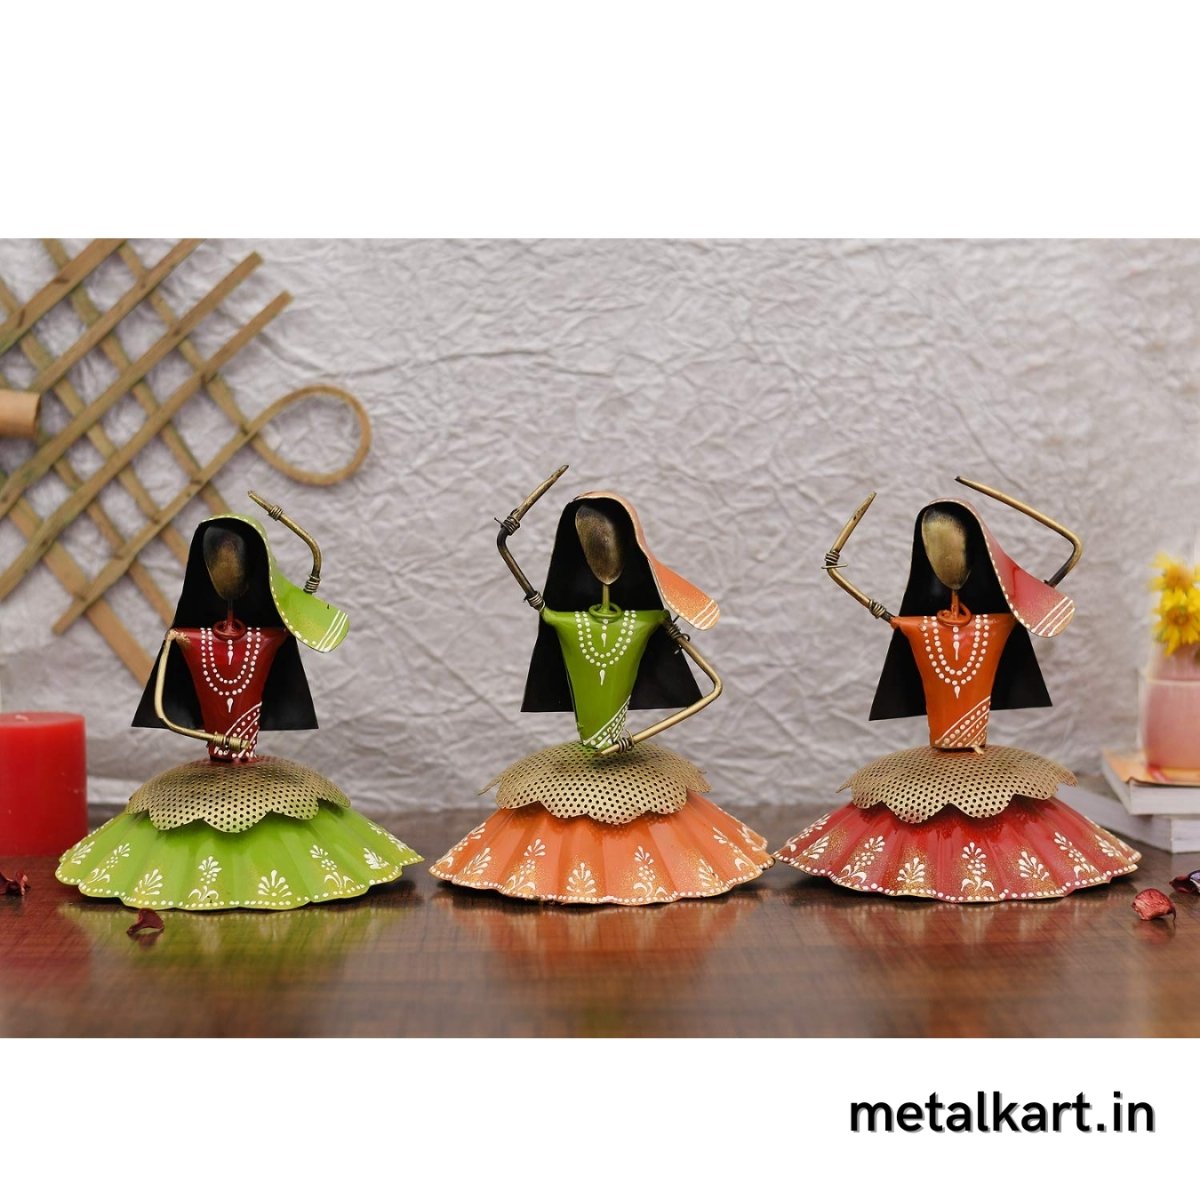 Handcrafted Set of 3 Traditional Rajasthani Kalbeliya Dancers Table décor (8*8*10 Inches)